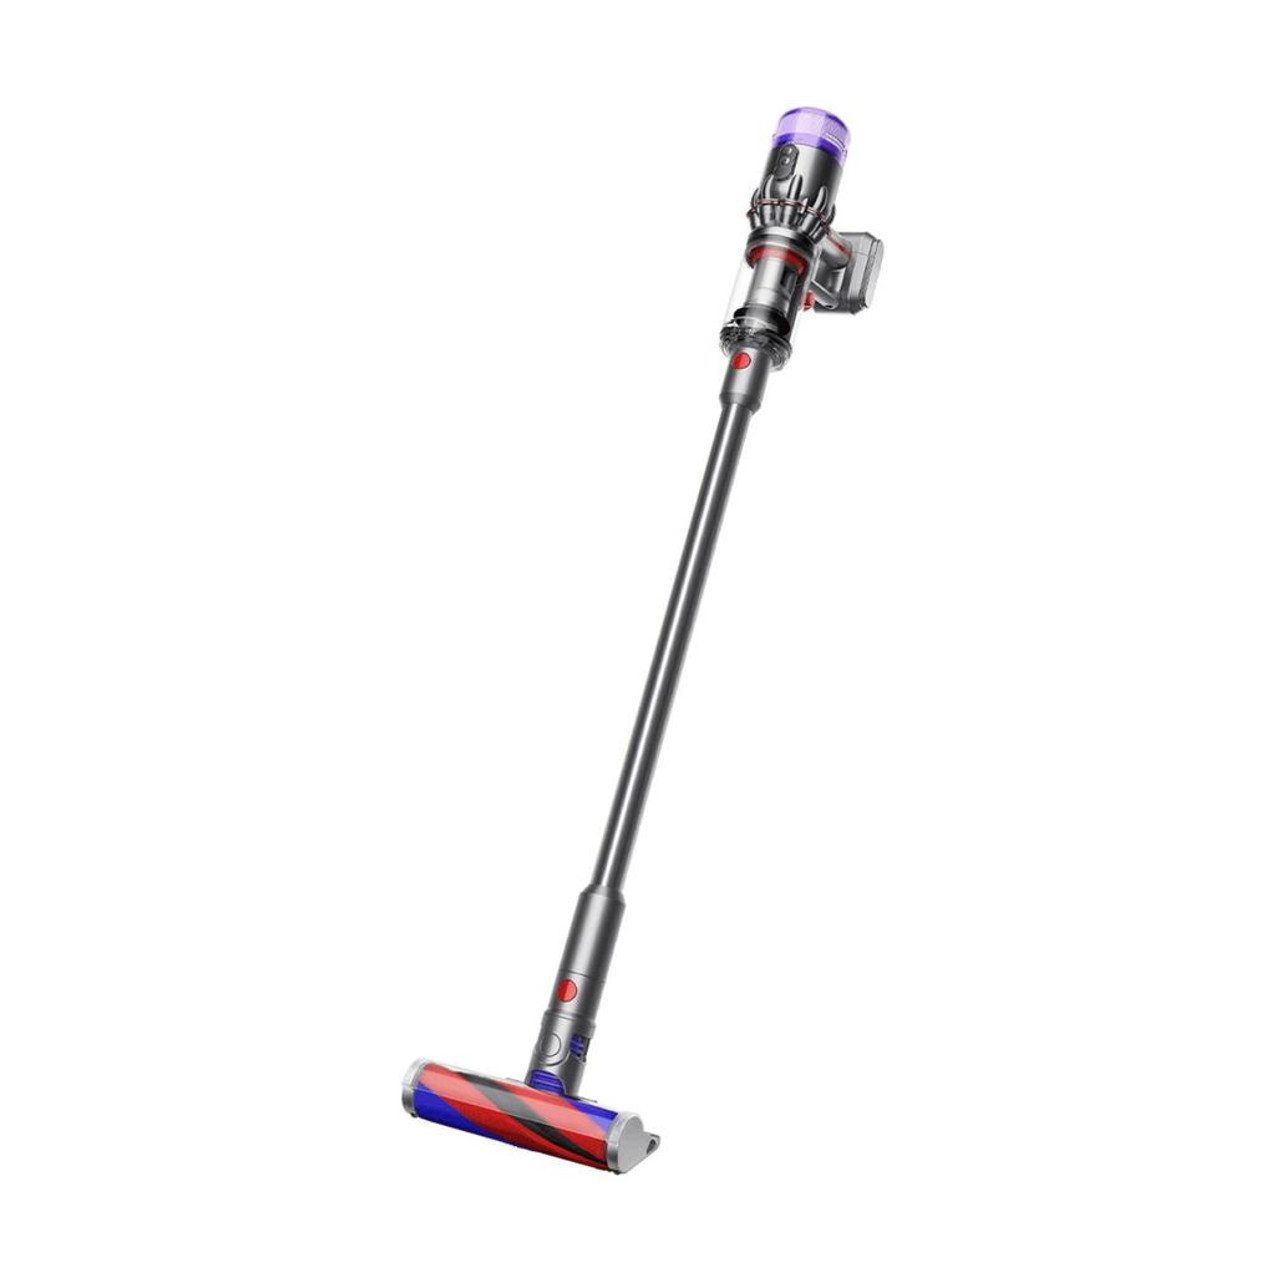 Replacement battery for your Dyson Micro 1.5kg™ vacuum